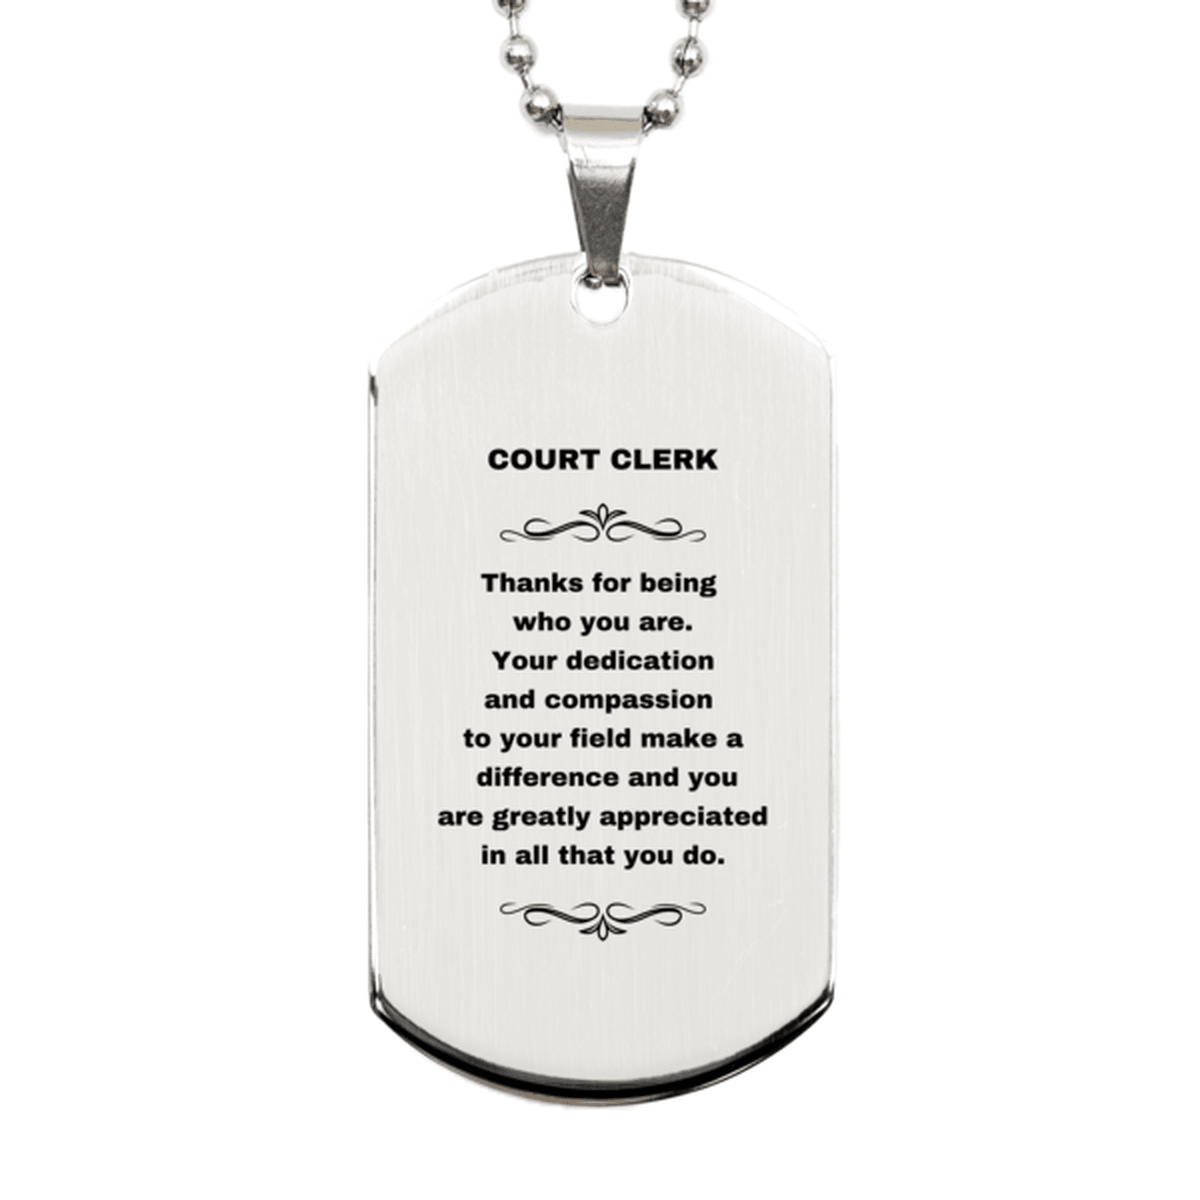 Court Clerk Silver Dog Tag Necklace Engraved Bracelet - Thanks for being who you are - Birthday Christmas Jewelry Gifts Coworkers Colleague Boss - Mallard Moon Gift Shop